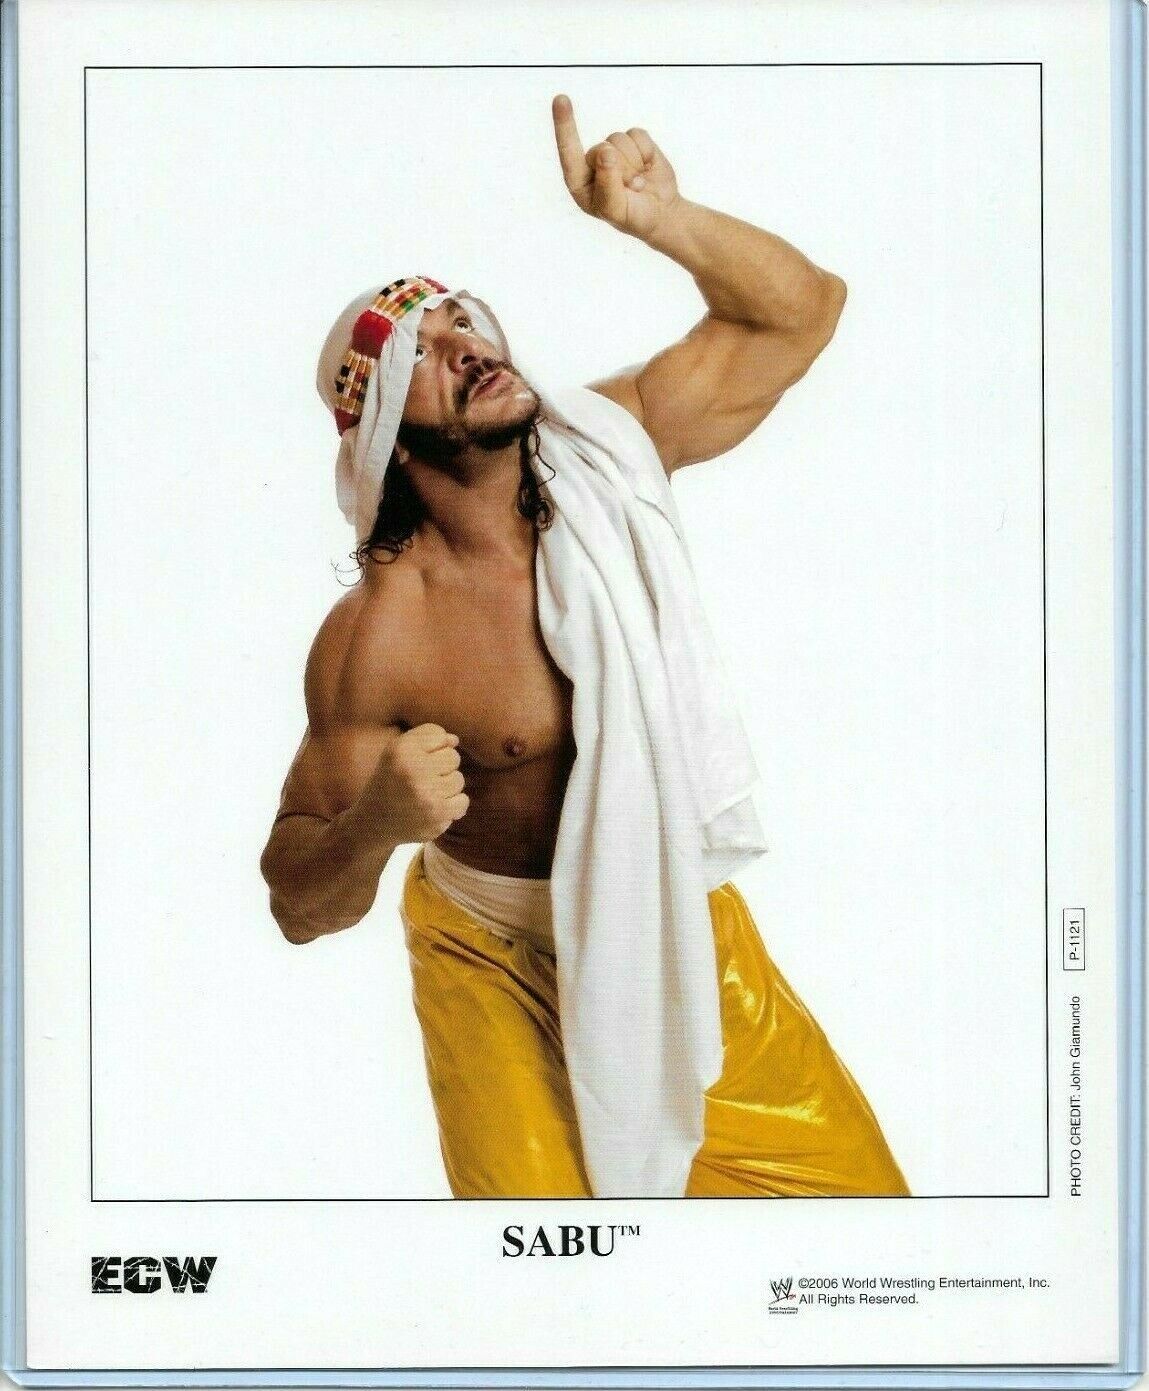 WWE SABU P-1121 OFFICIAL LICENSED AUTHENTIC ORIGINAL 8X10 PROMO Photo Poster painting VERY RARE